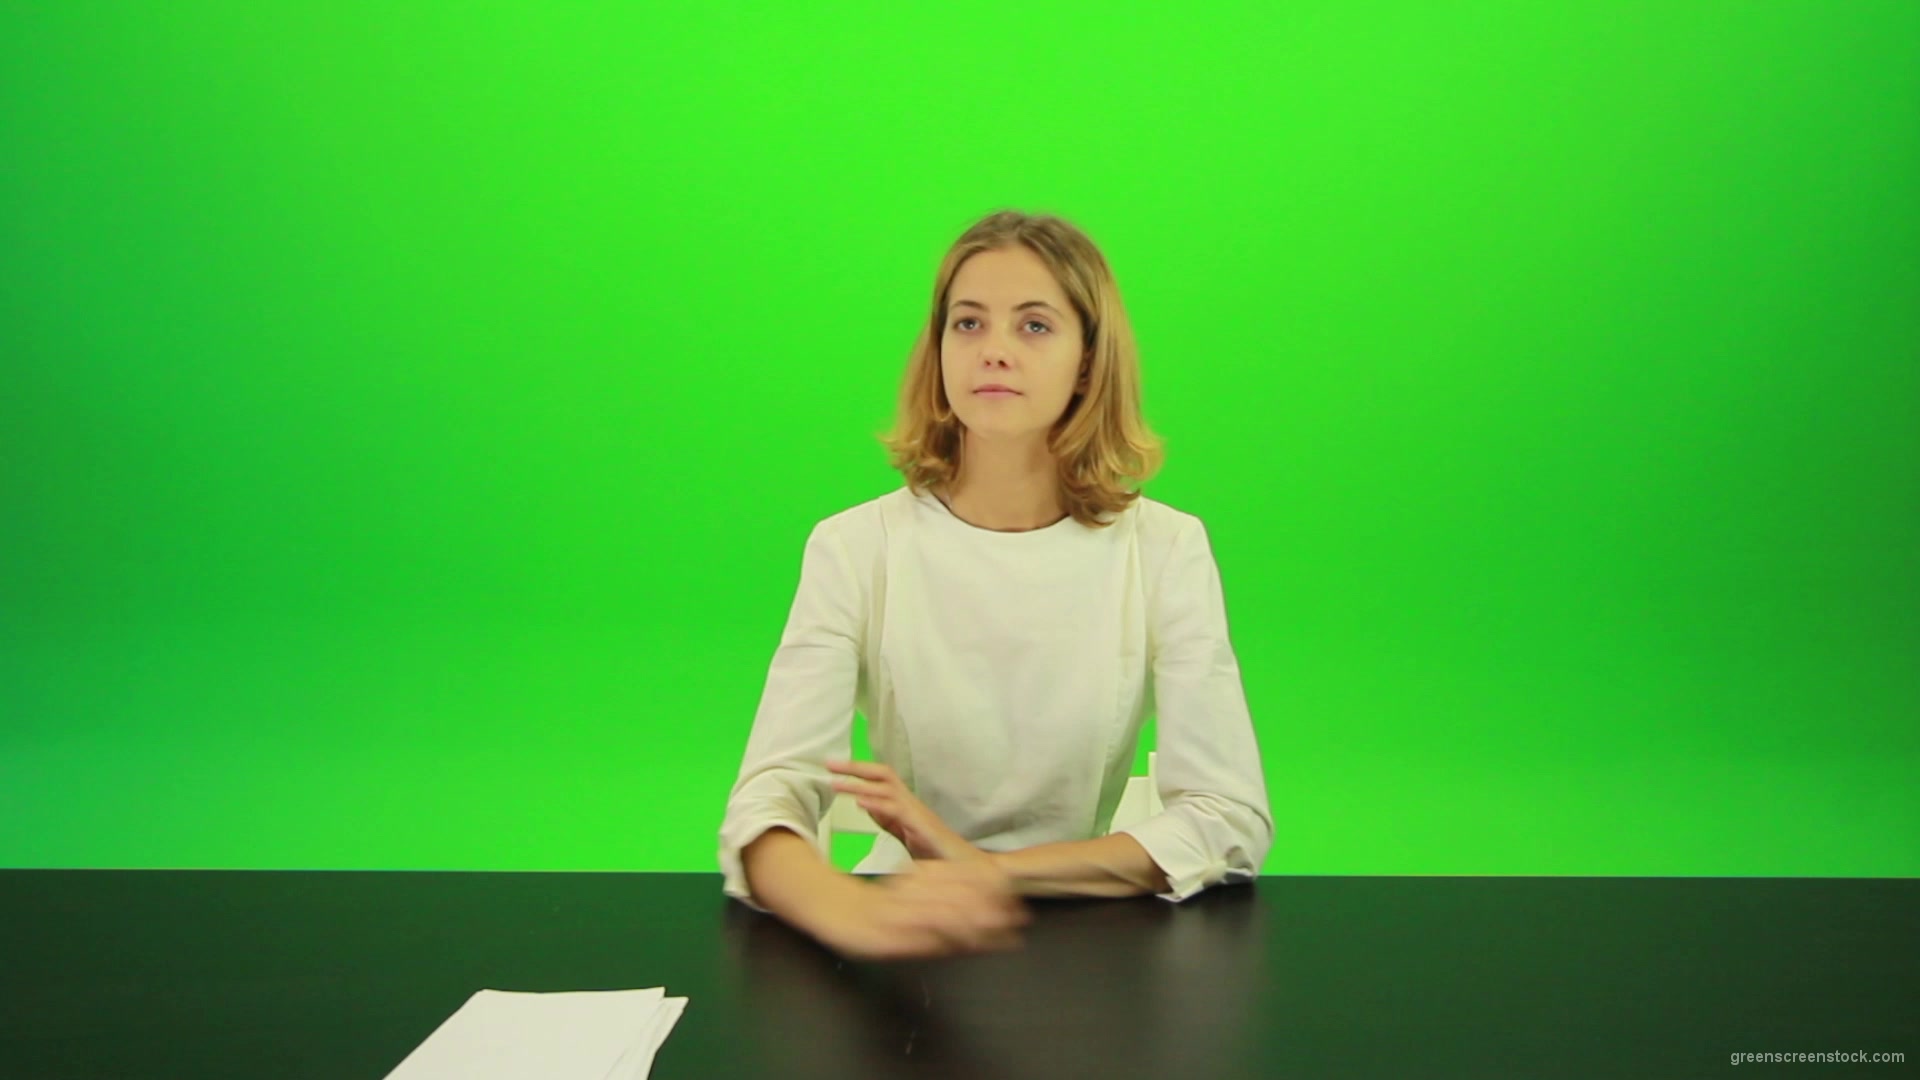 Blonde-girl-adult-gives-1-one-point-mark-score-Full-HD-Green-Screen-Video-Footage_009 Green Screen Stock